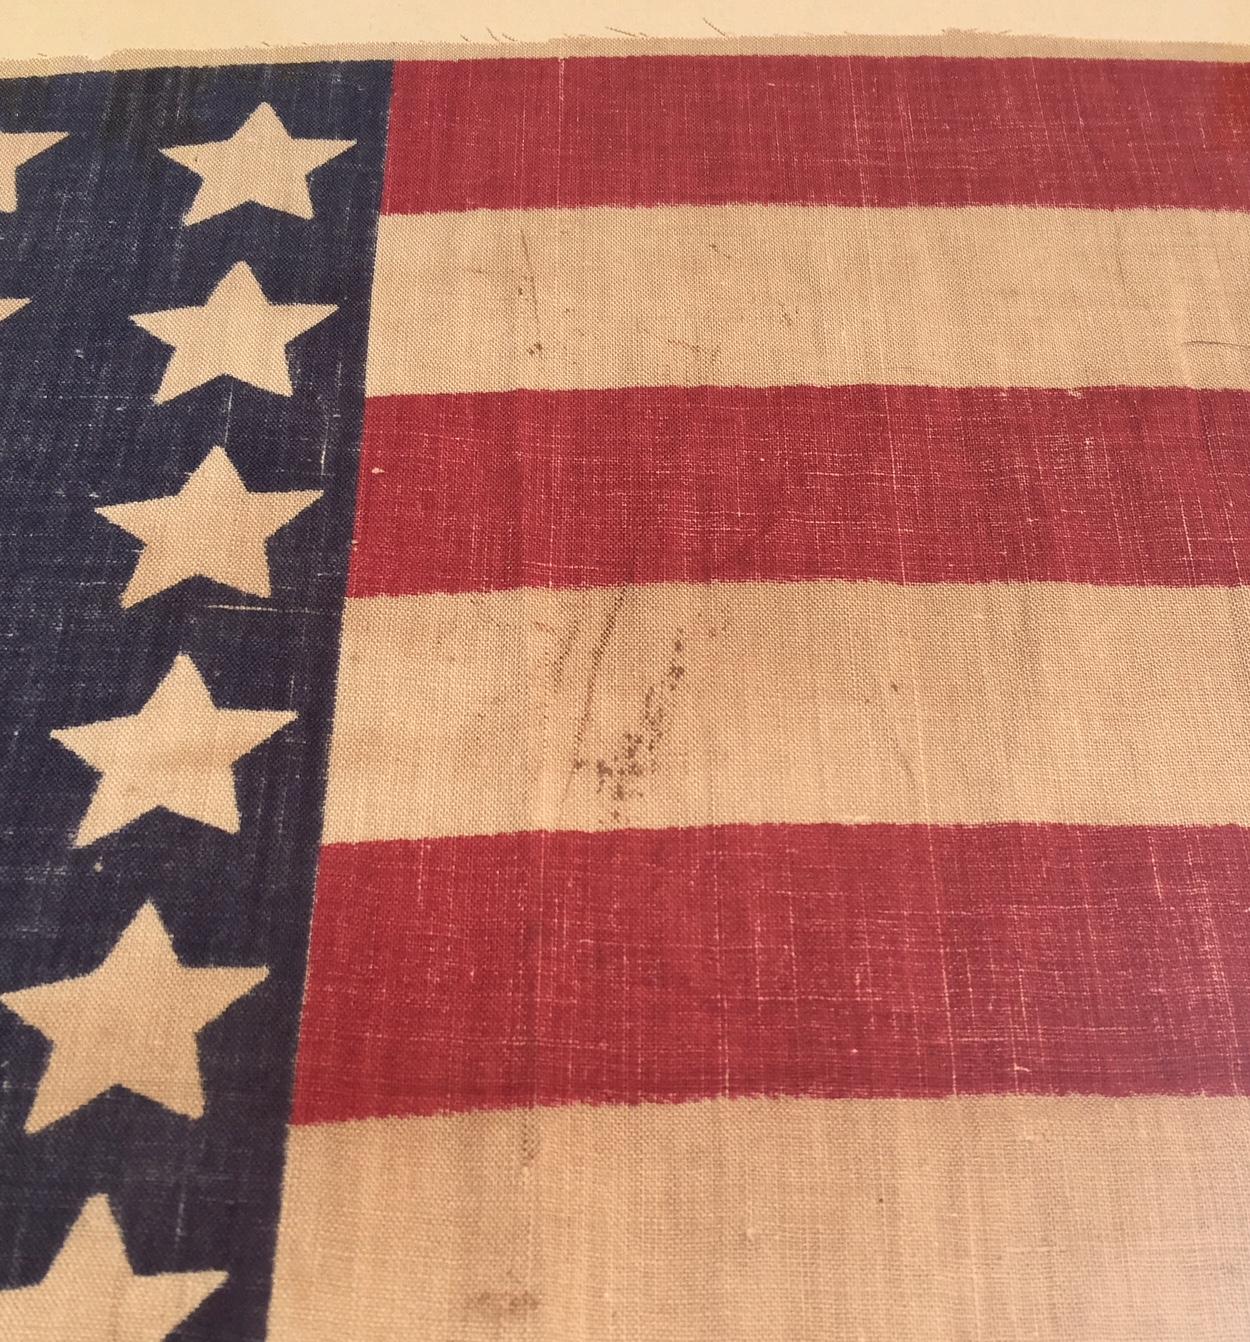 Antique 42 Star American flag commemorating Washington Statehood, circa 1890. This was never an official U.S. Flag by Act of Congress, but rather a 